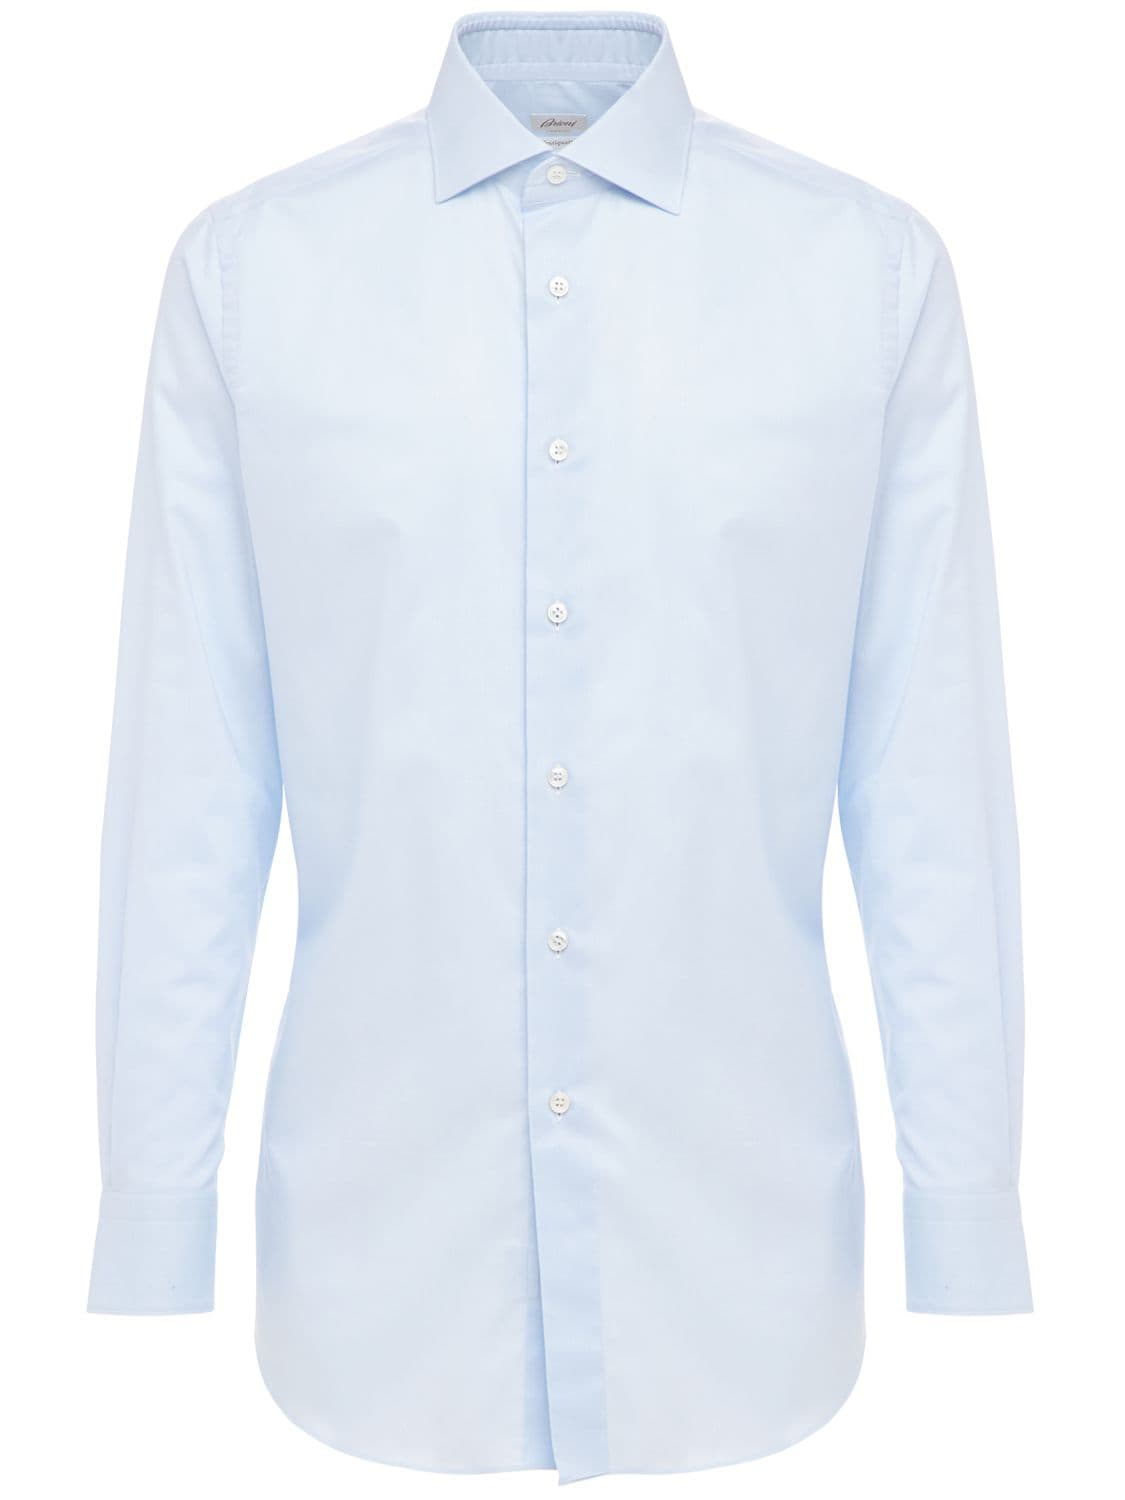 Brioni Dino Fit 24 Cotton Twill Shirt In Light Blue